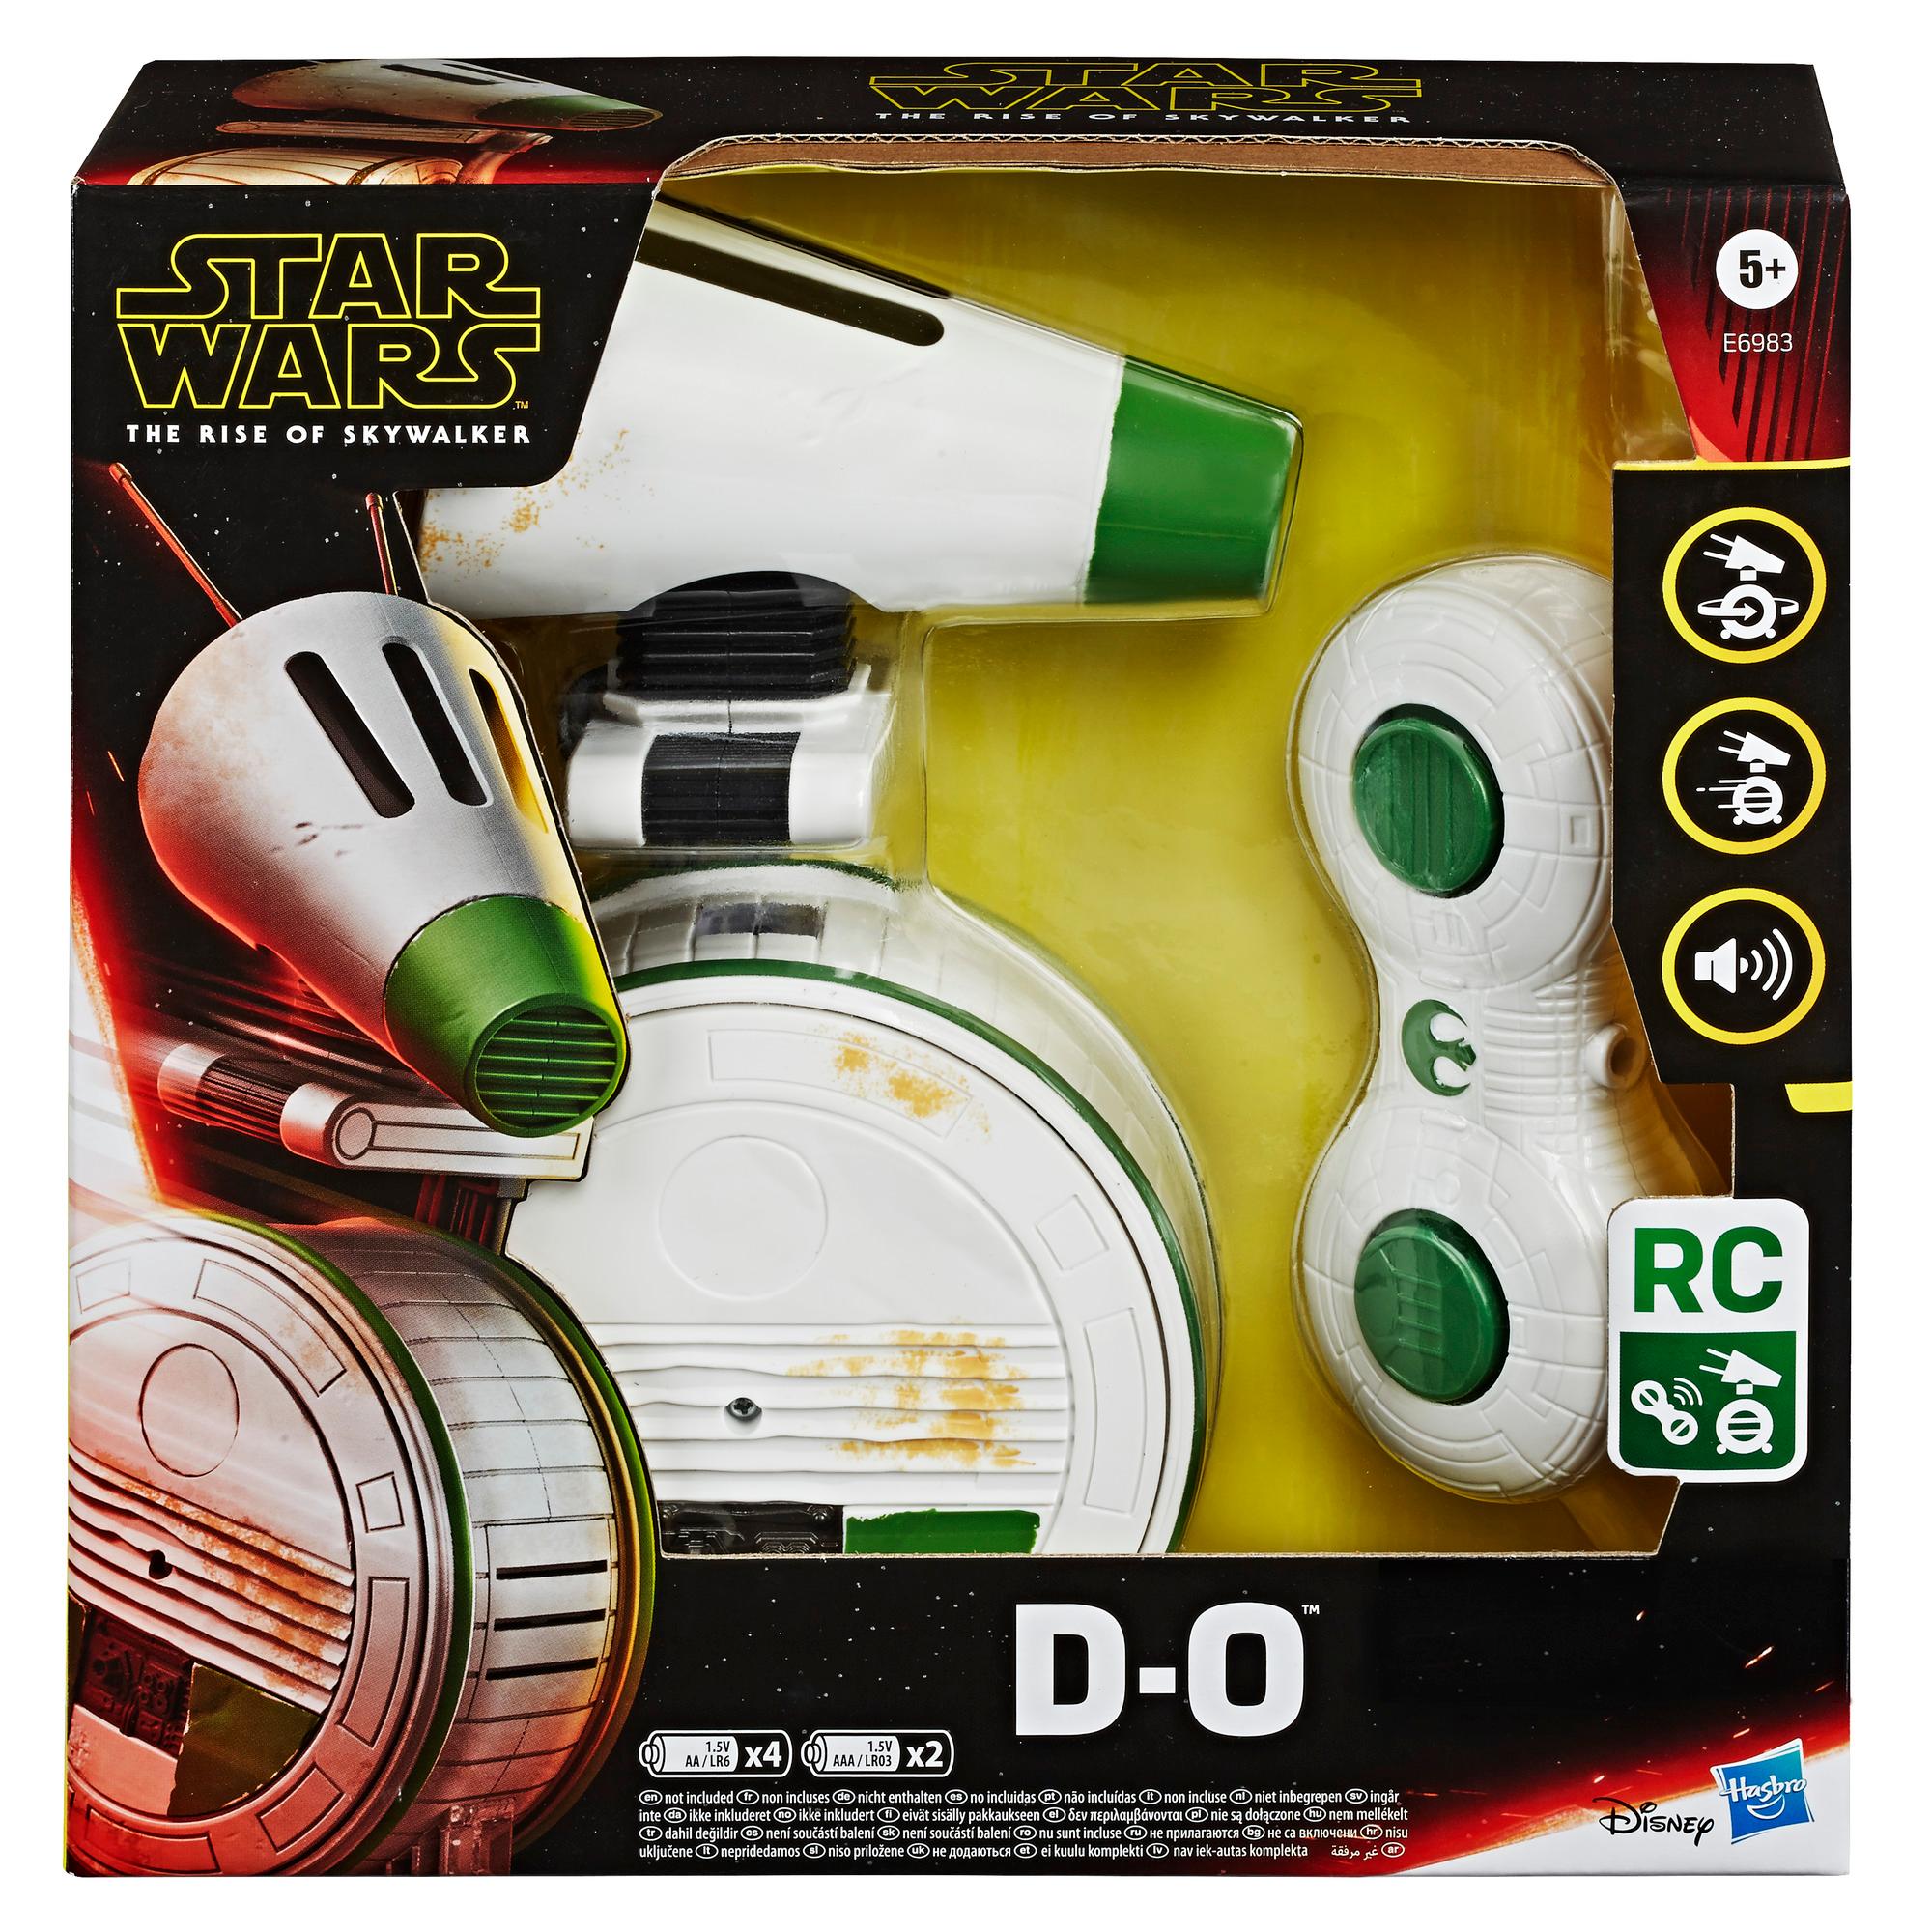 Hasbro Star Wars Remote Control D-O Rolling 9.8 inch Electronic Droid Toy E6983 for sale online 